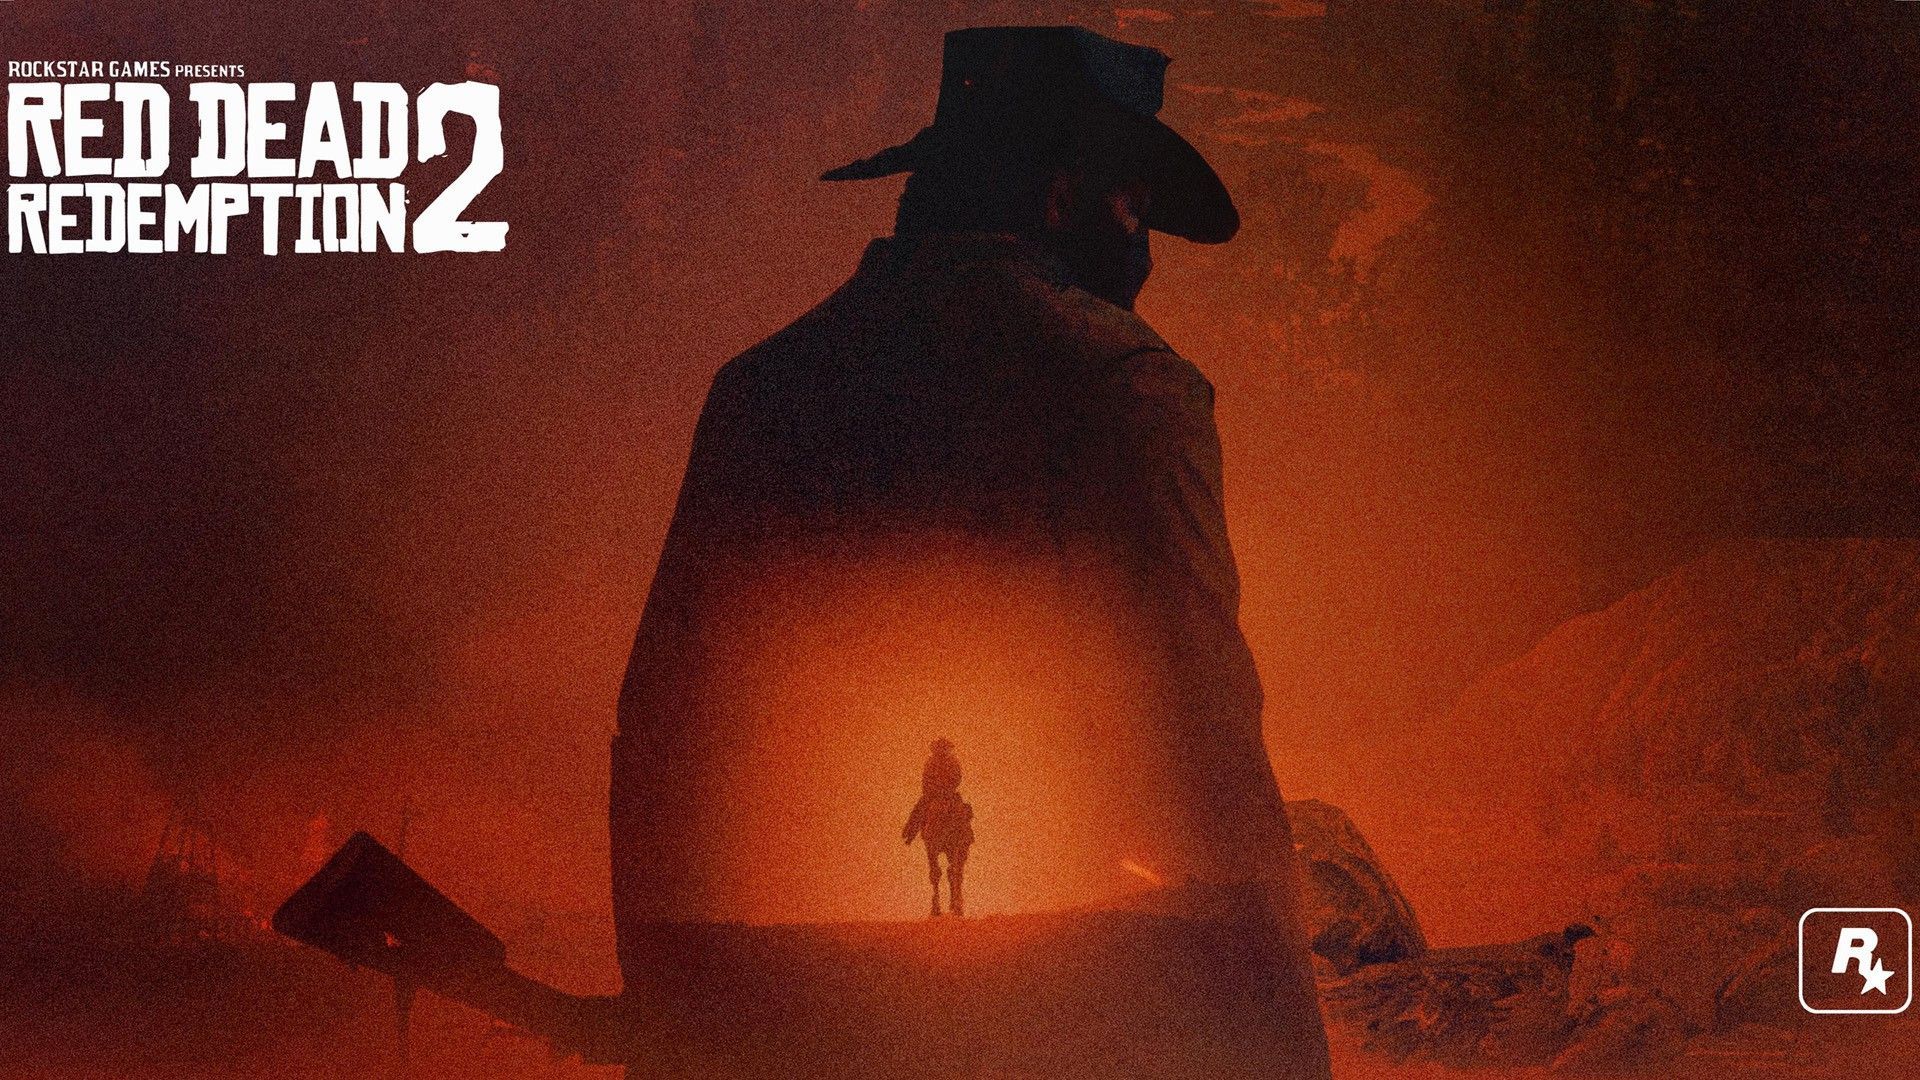 Red Dead Redemption 2 Wallpaper High Quality. Red dead redemption ii, Red dead redemption, Western film